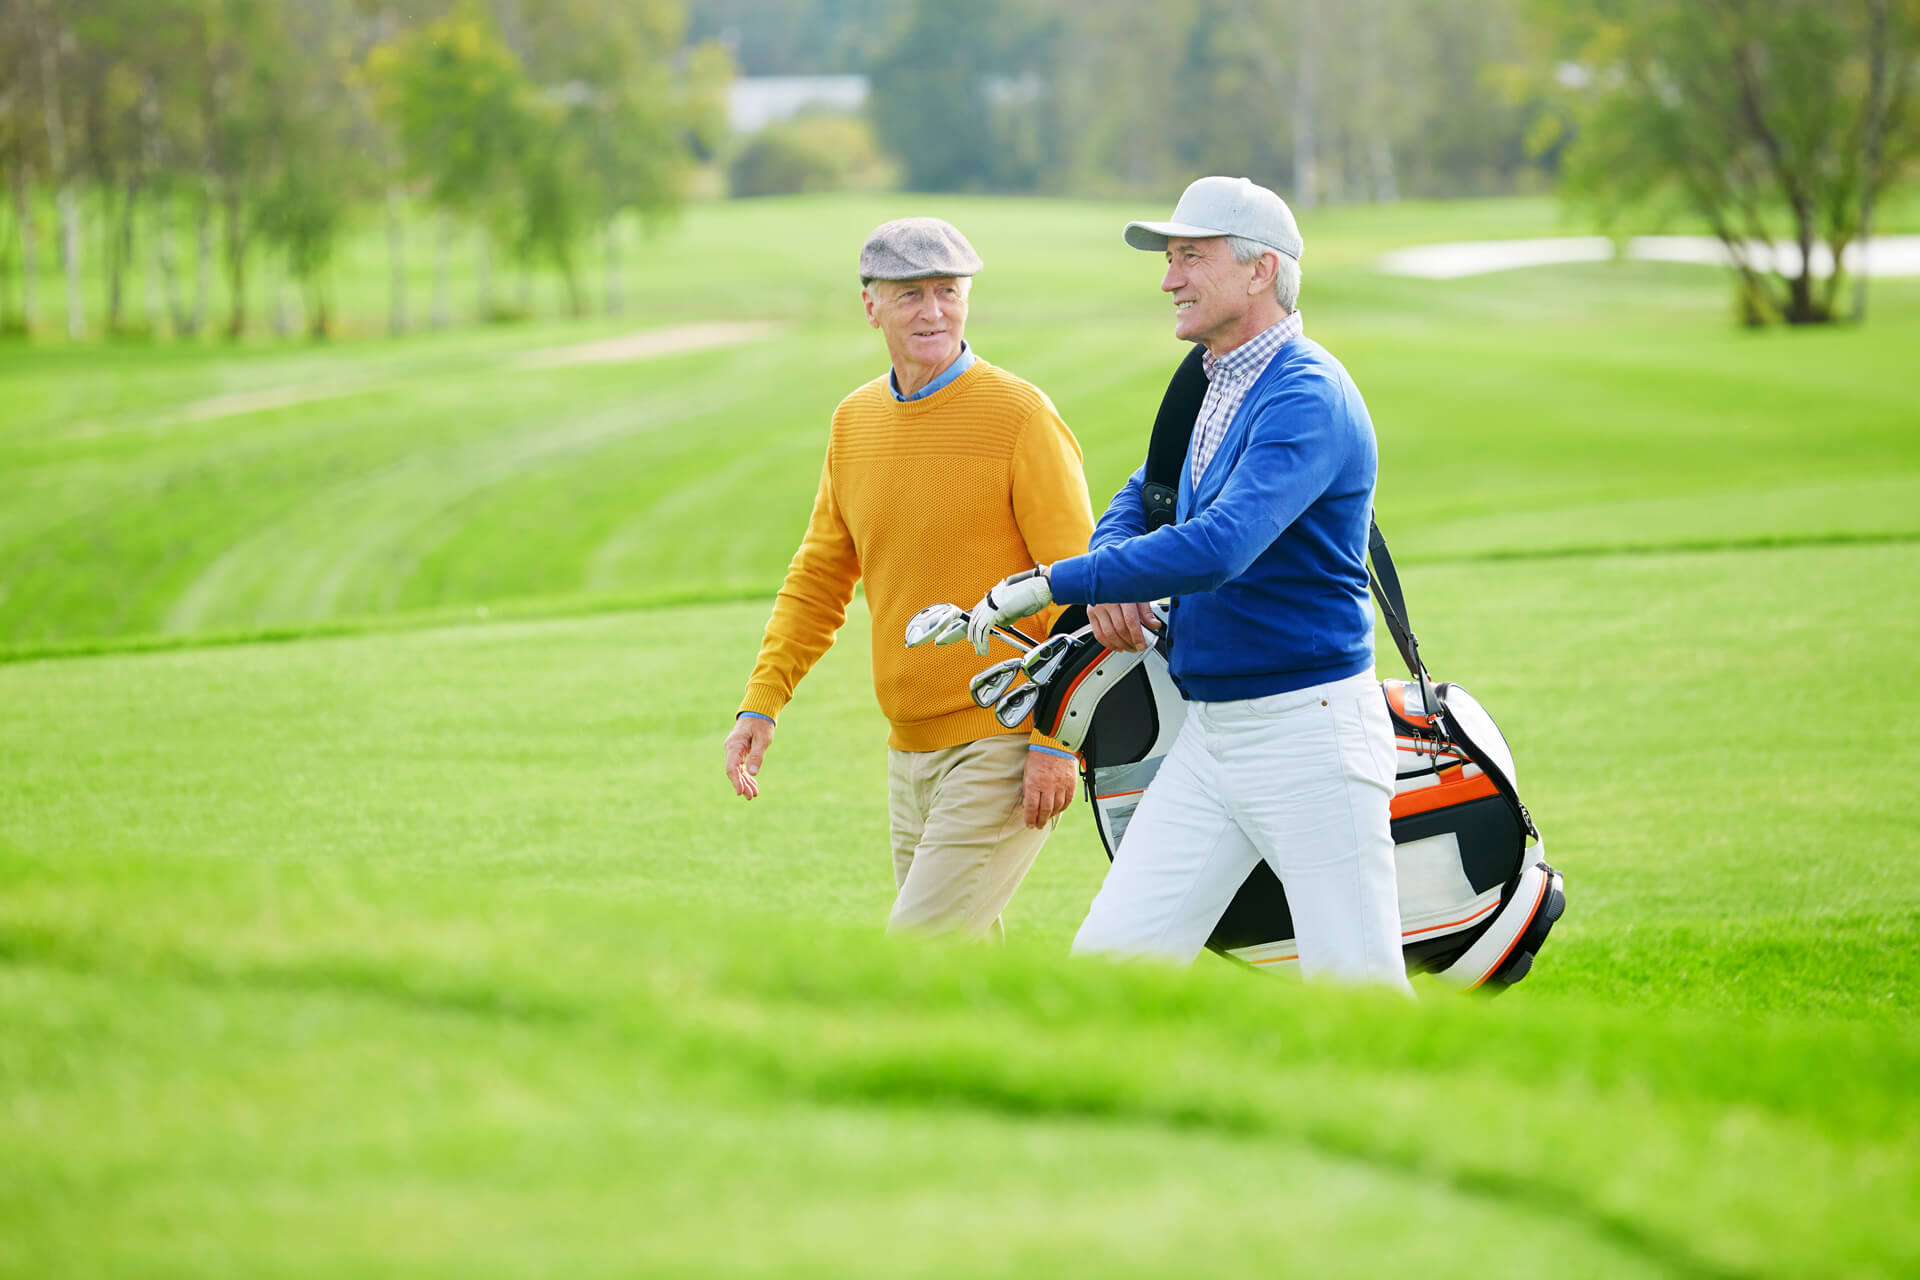 Incontinence during sports can also be a problem for men, e.g. when playing golf.